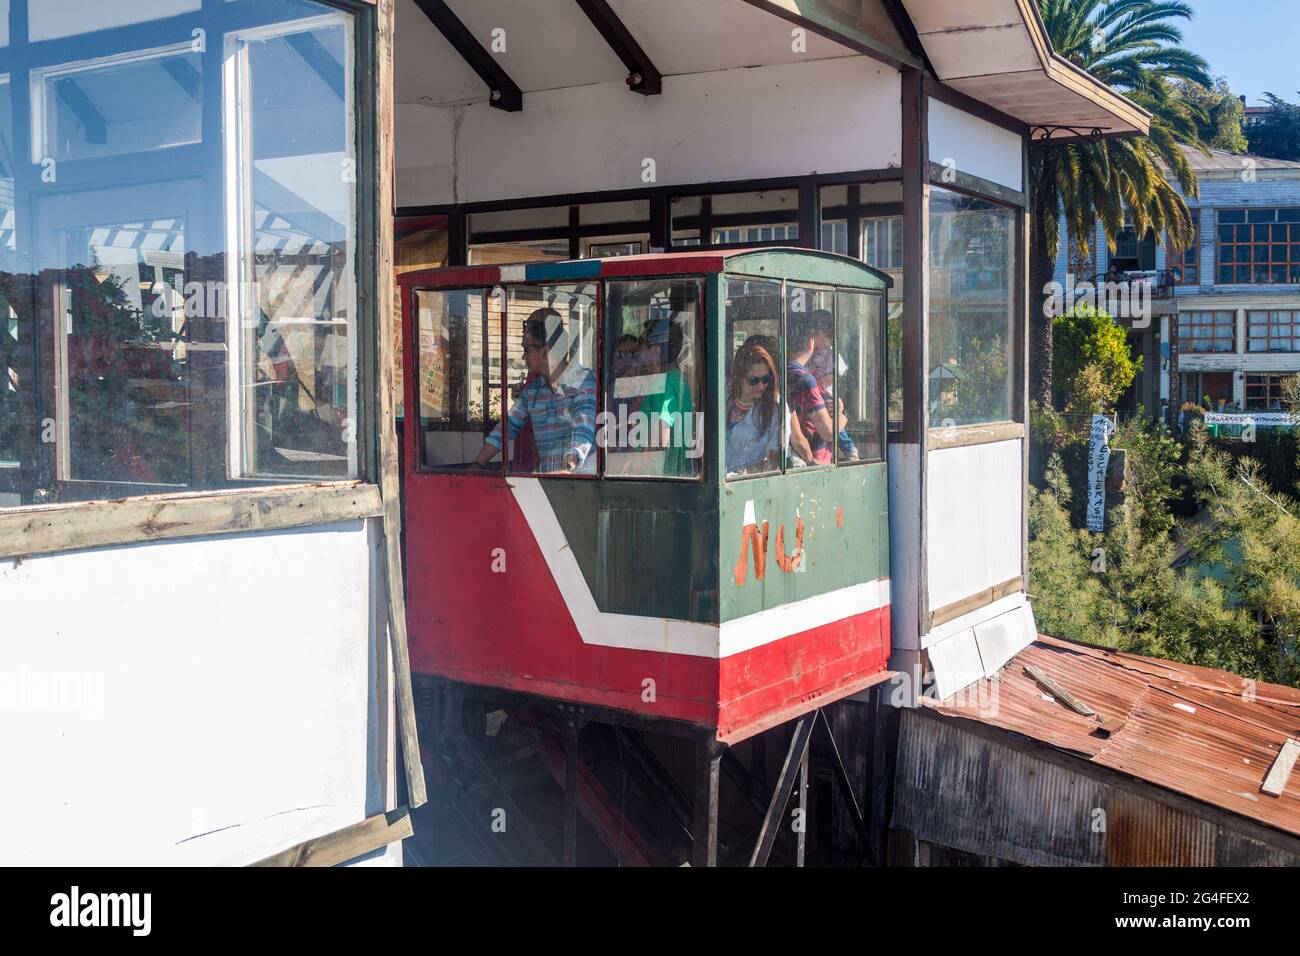 VALPARAISO, CHILE - MARCH 29, 2015: People ride a funicular in Valparaiso, Chile Stock Photo